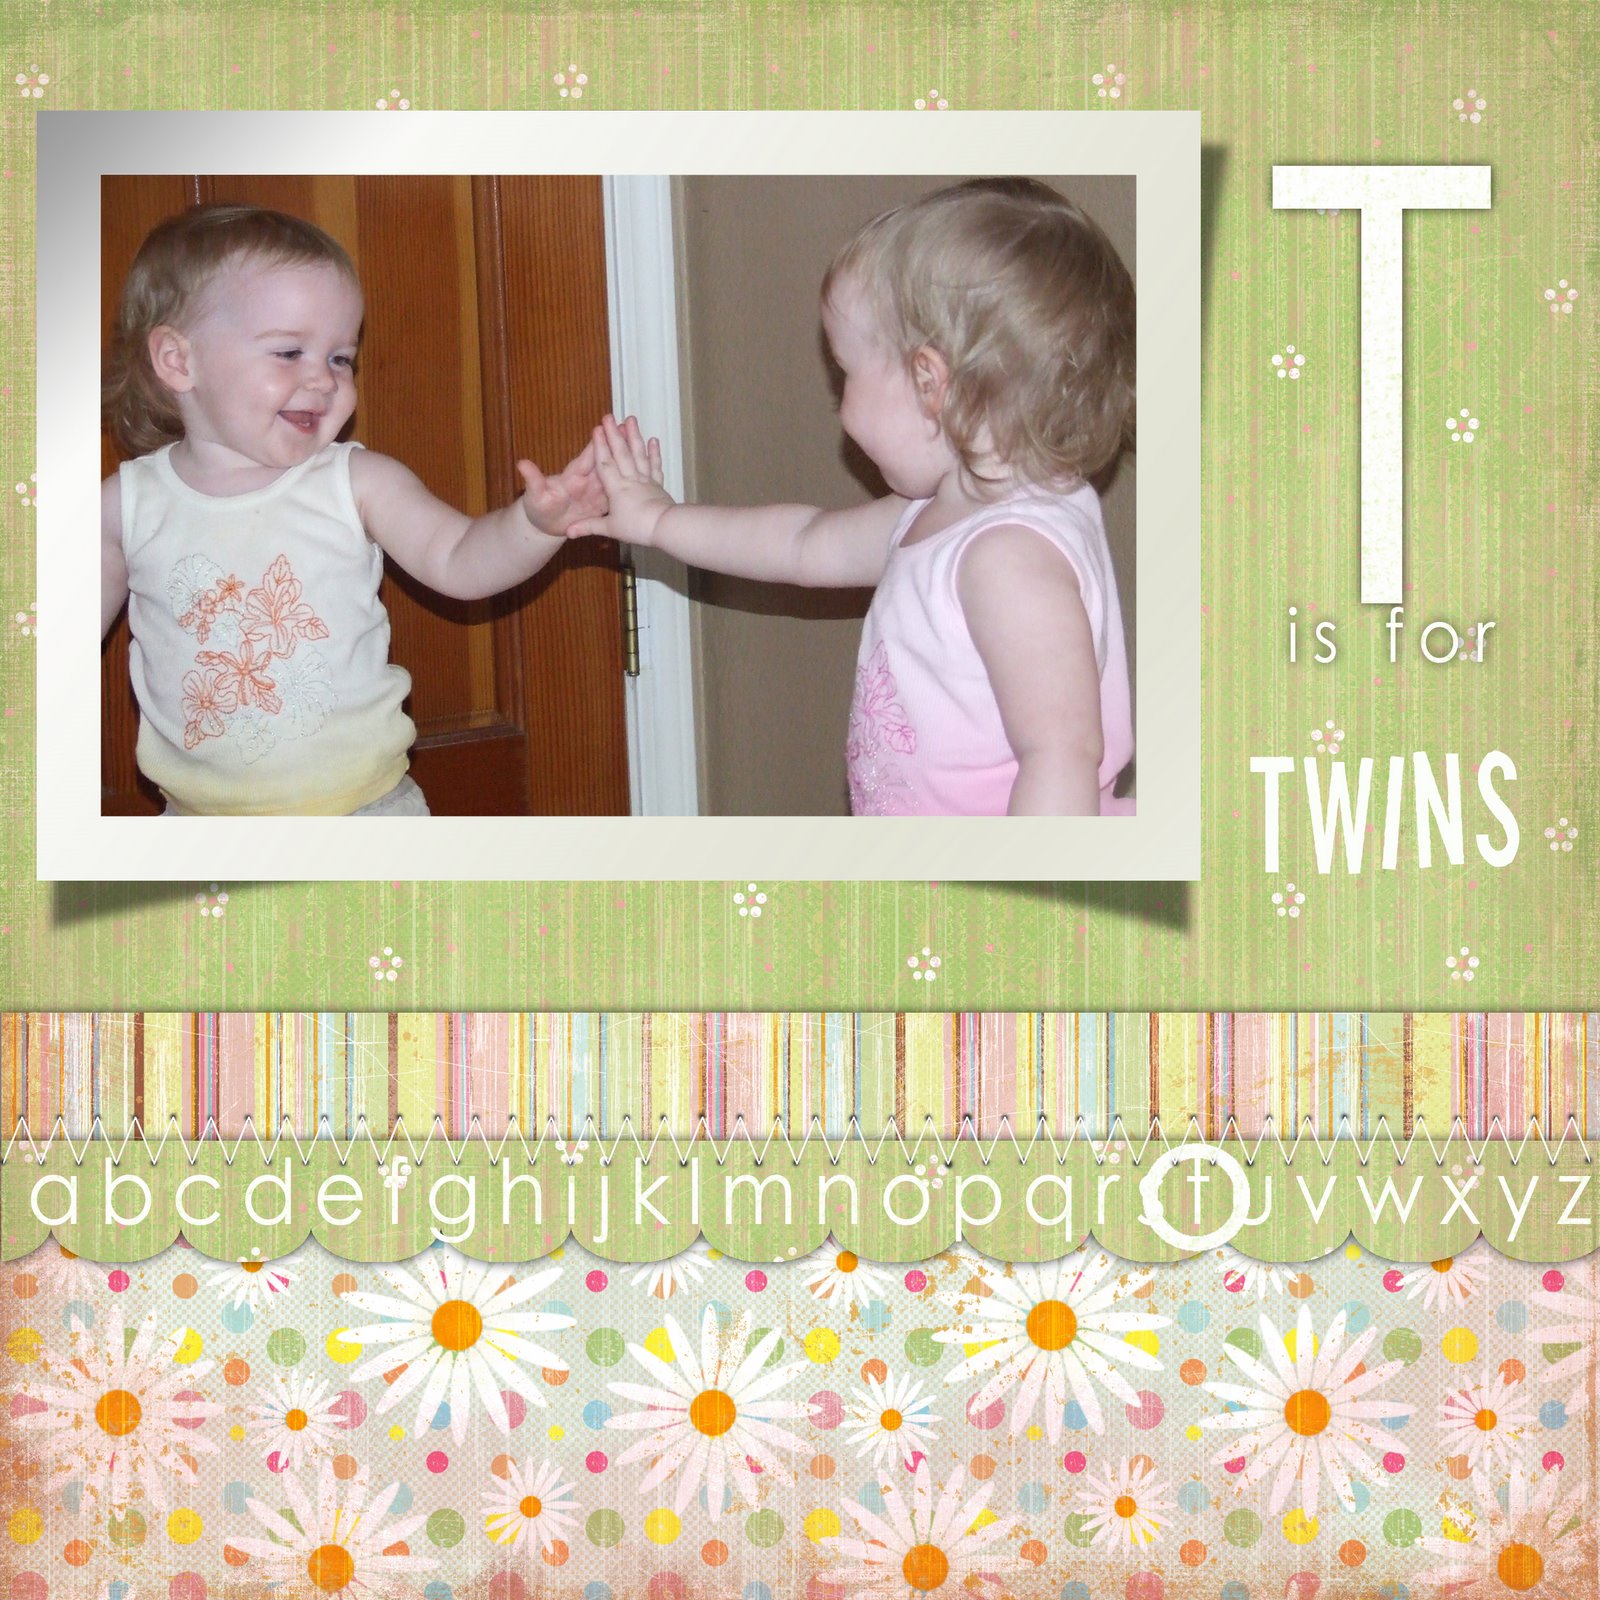 [T+is+for+Twins+copy.jpg]